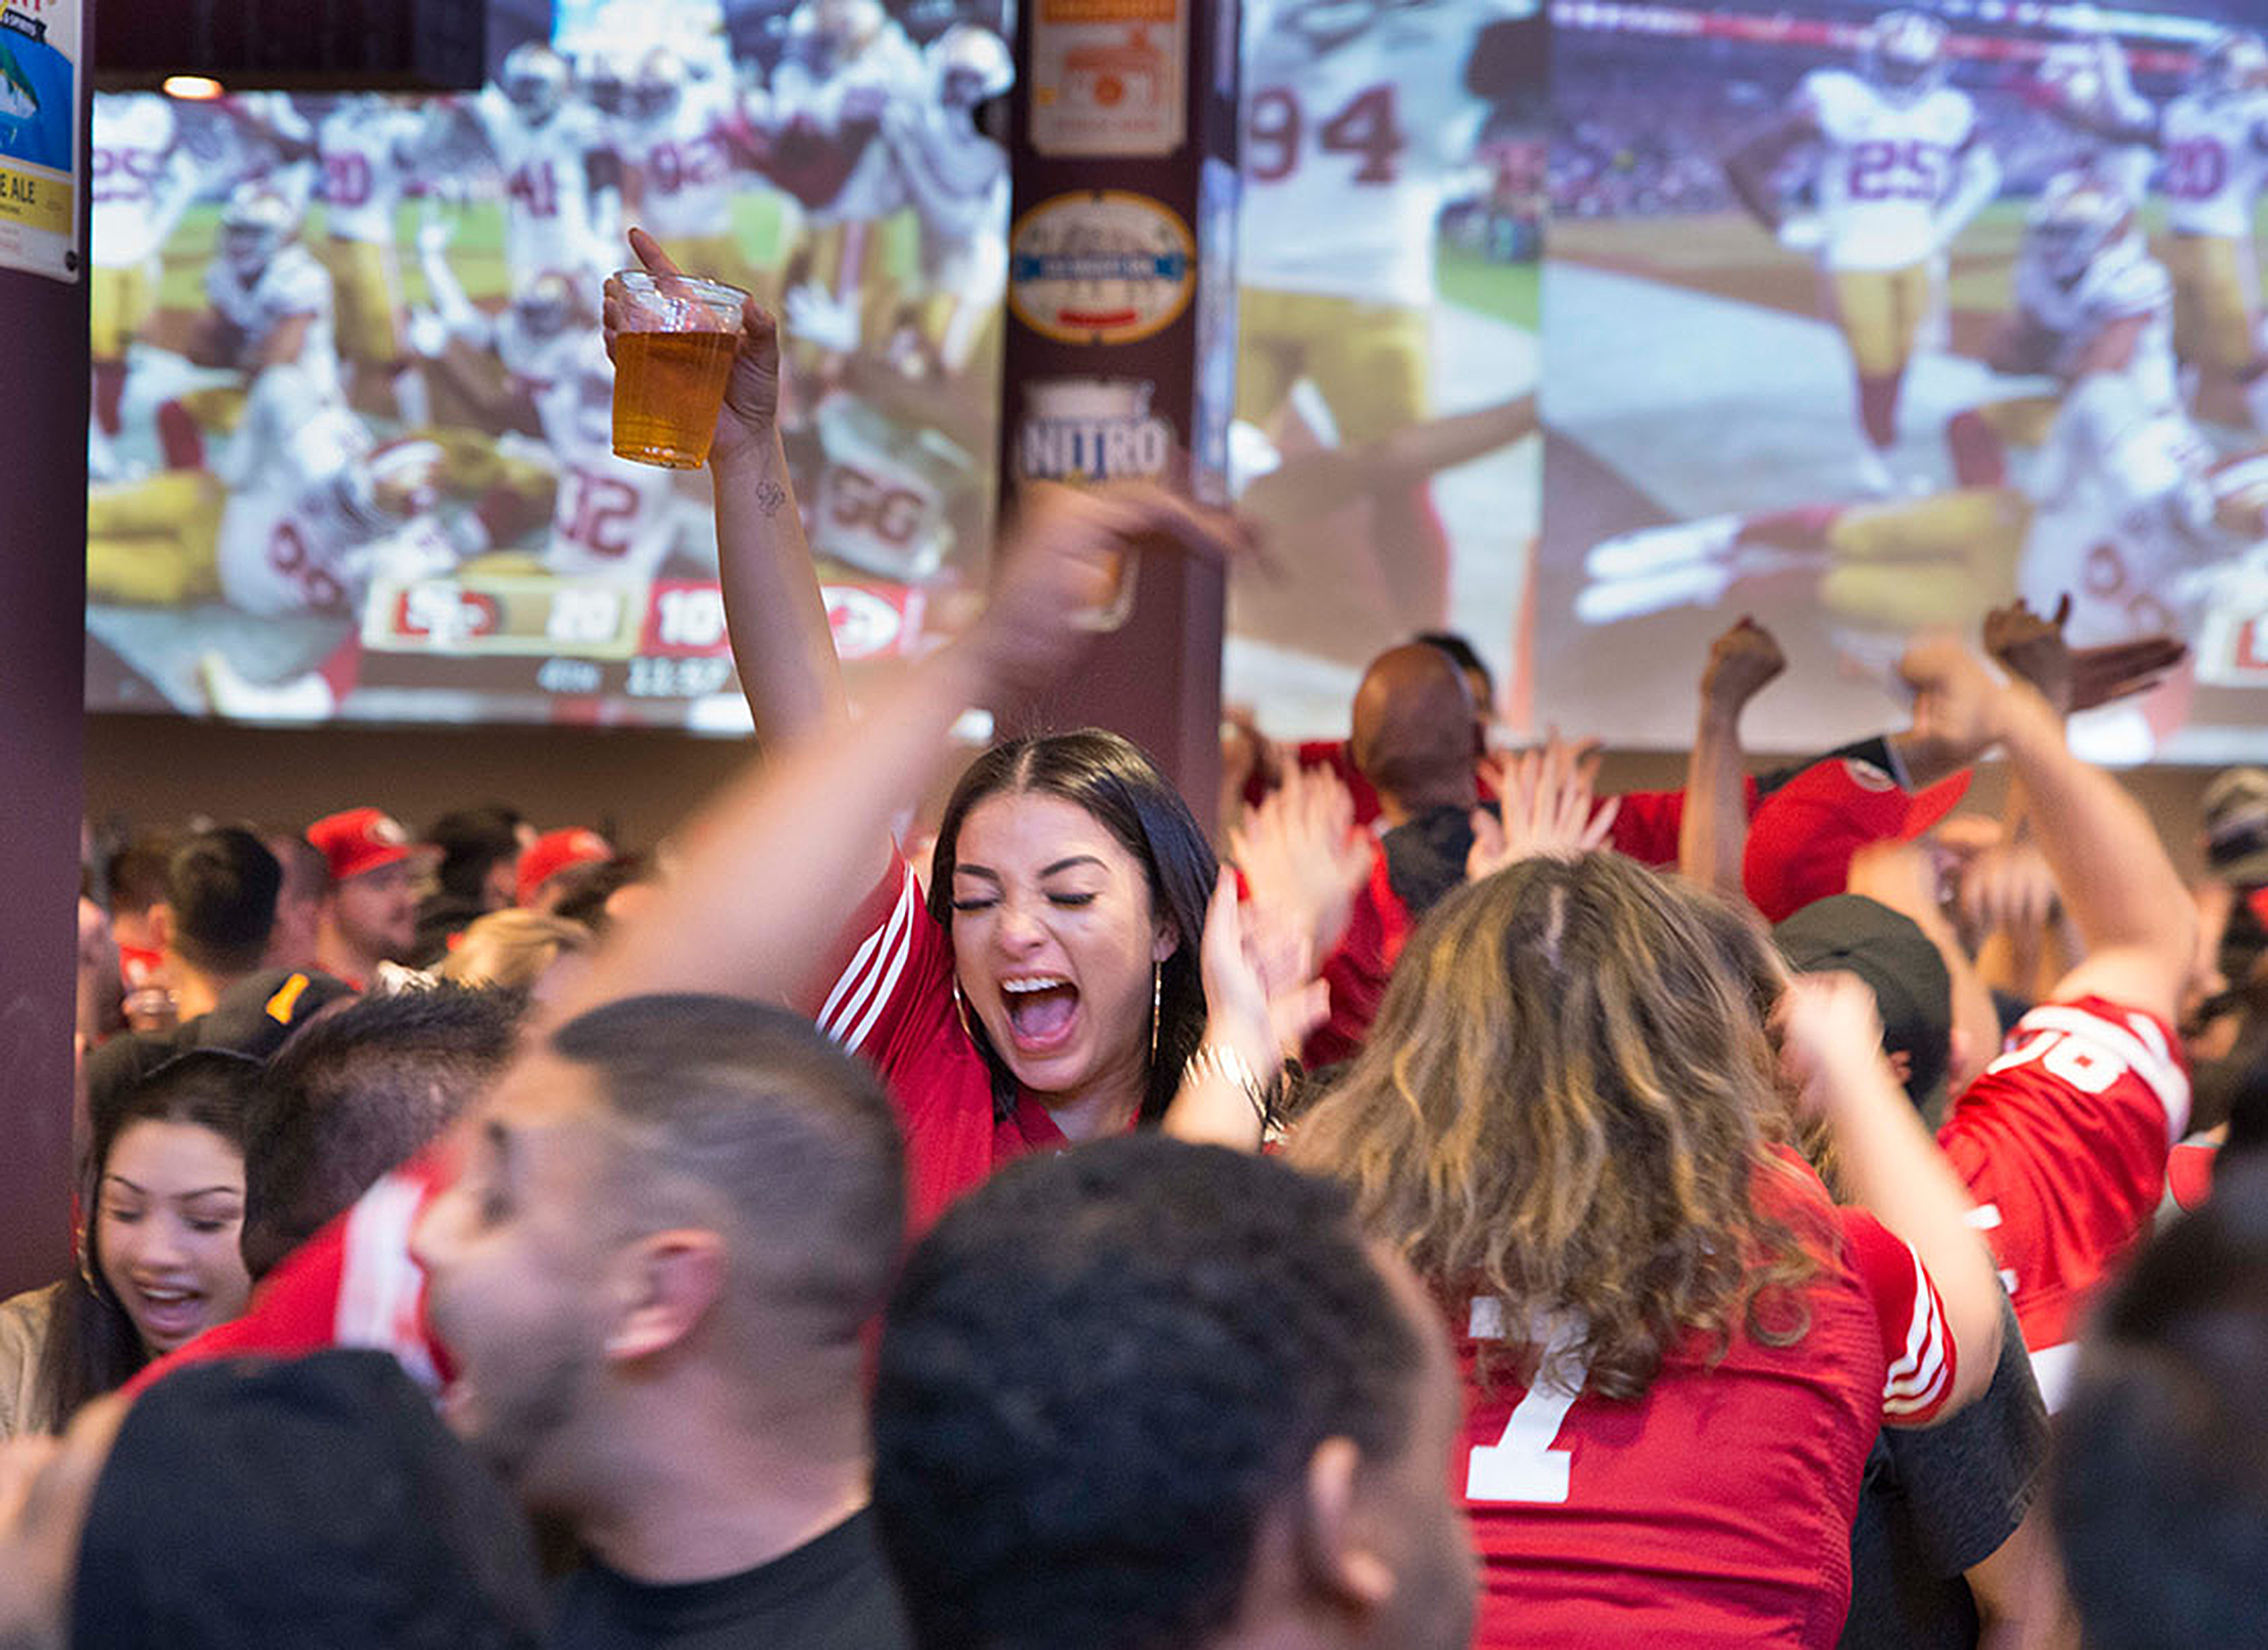 San Francisco 49ers Bars: Where To Watch Football in the Bay Area This Season